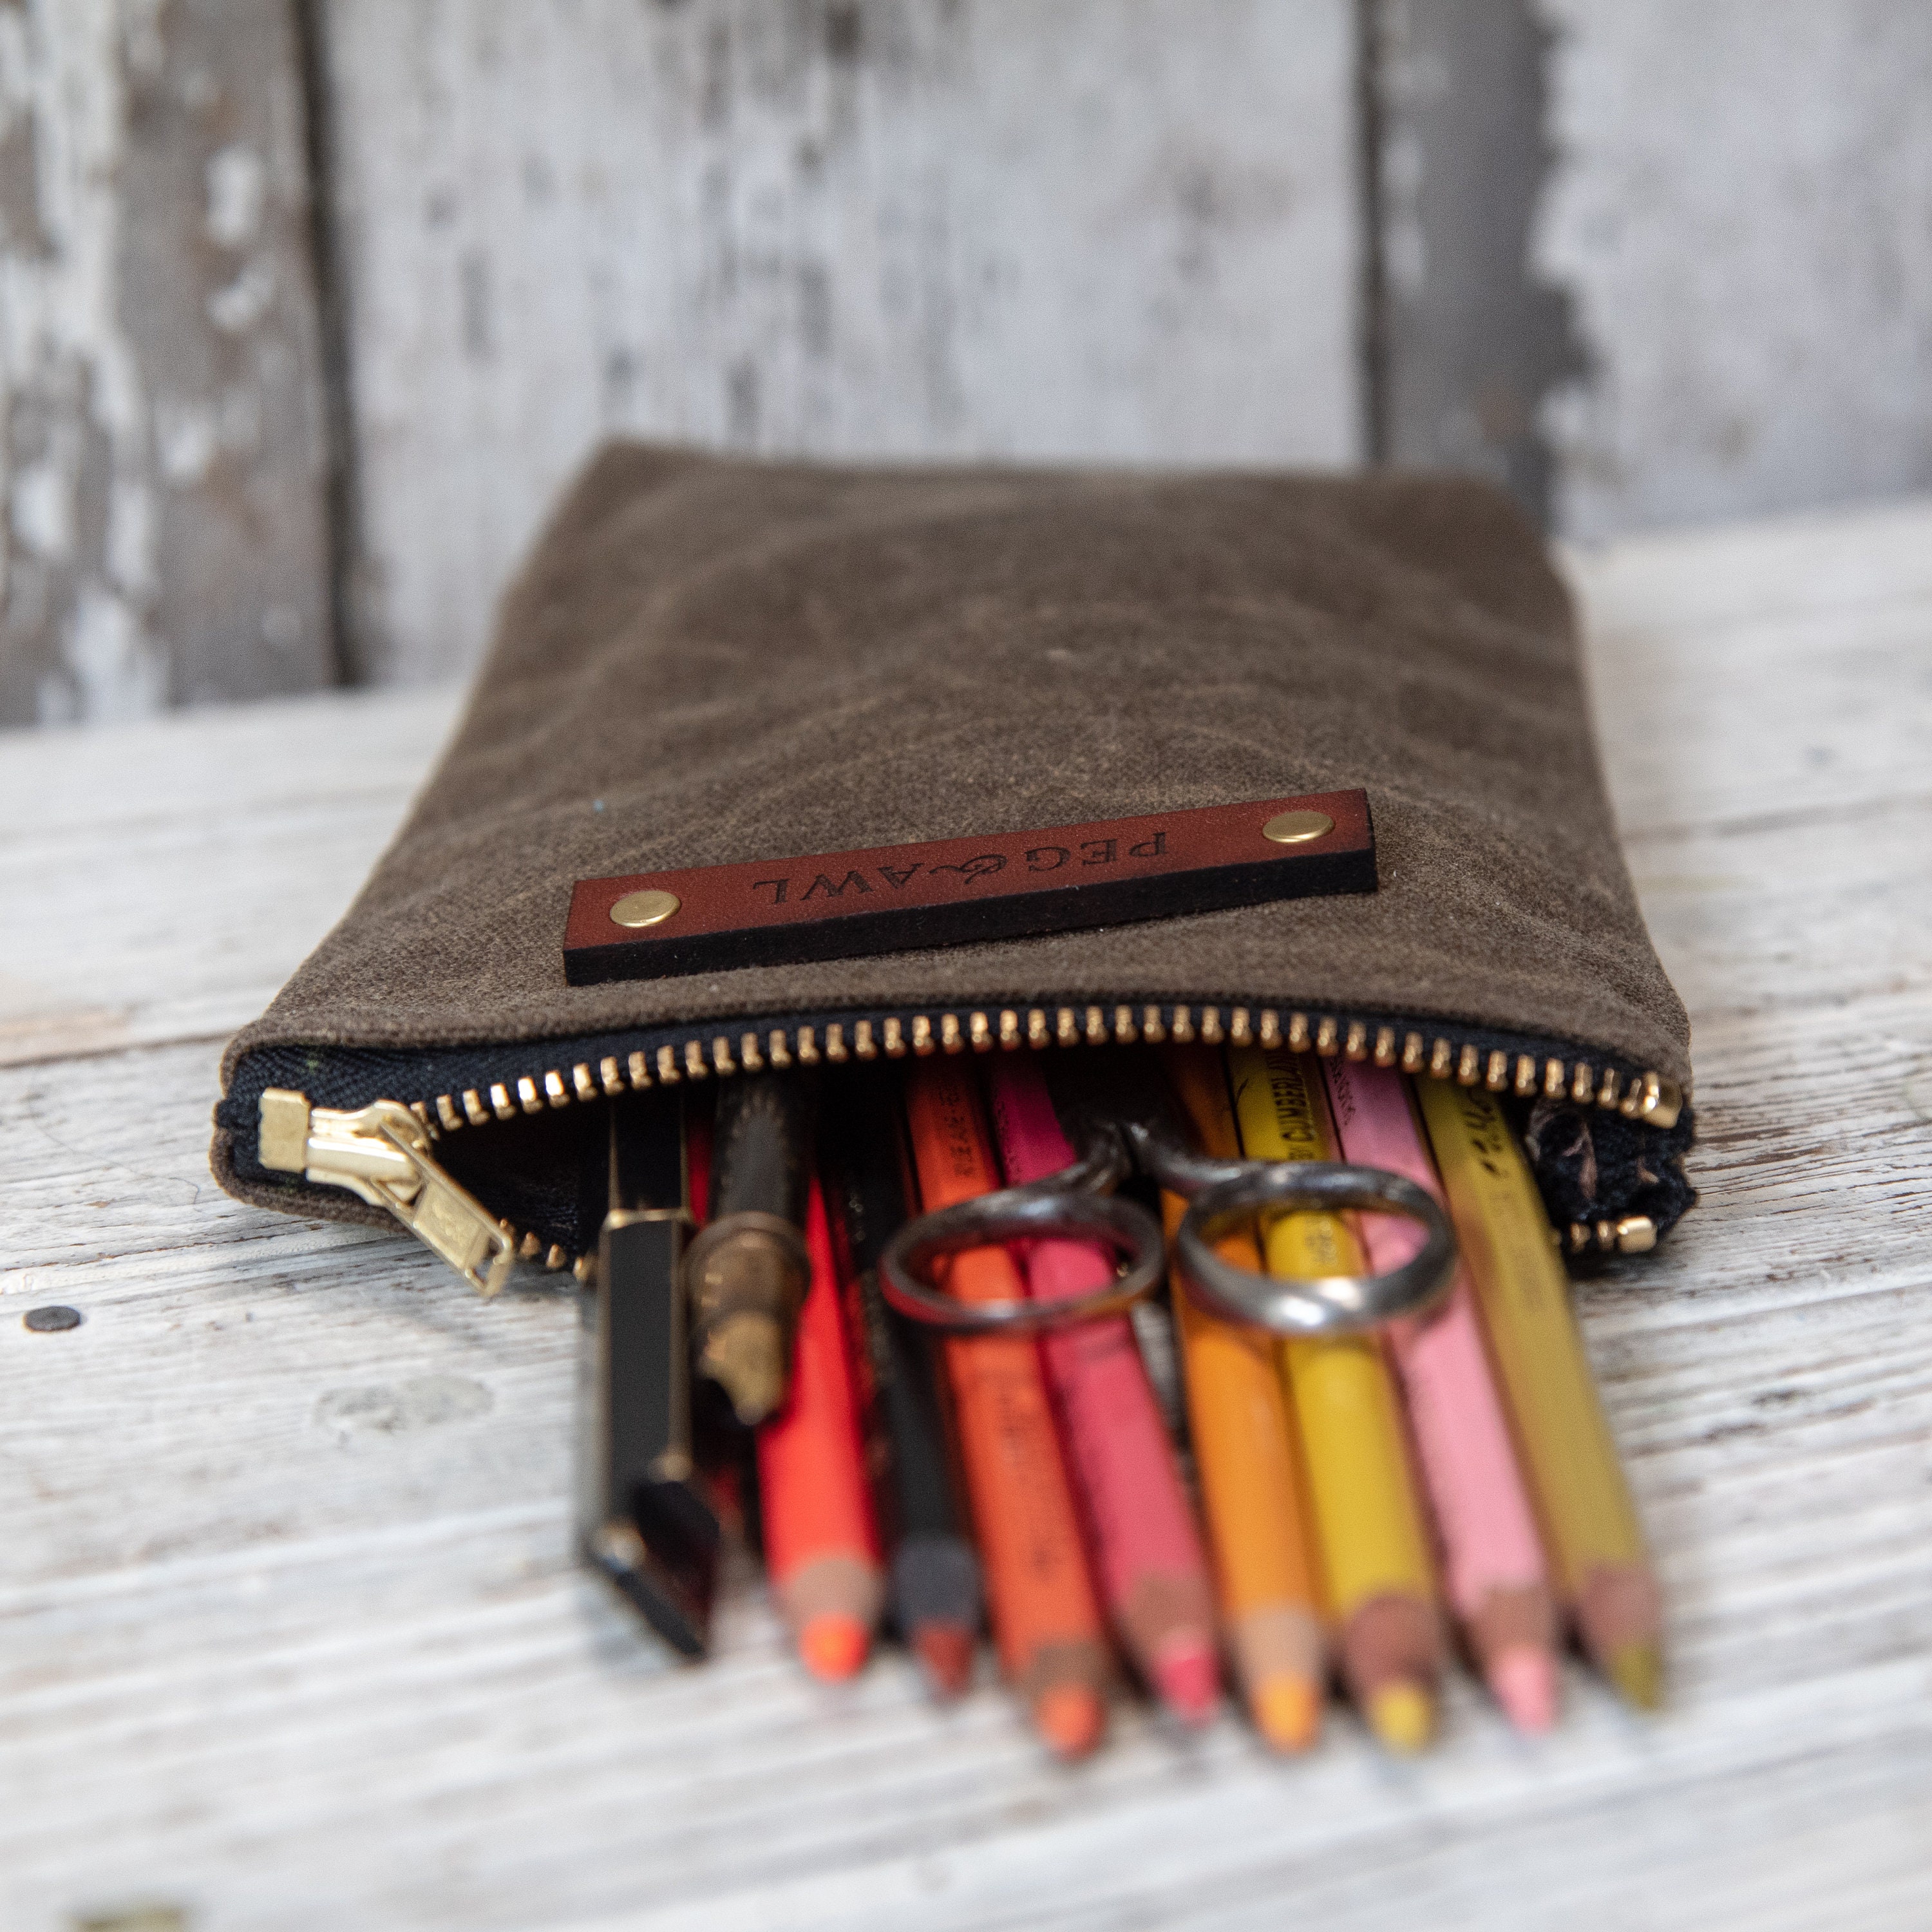 Ransom Six — Waxed Canvas Zipper Pouch - Olive